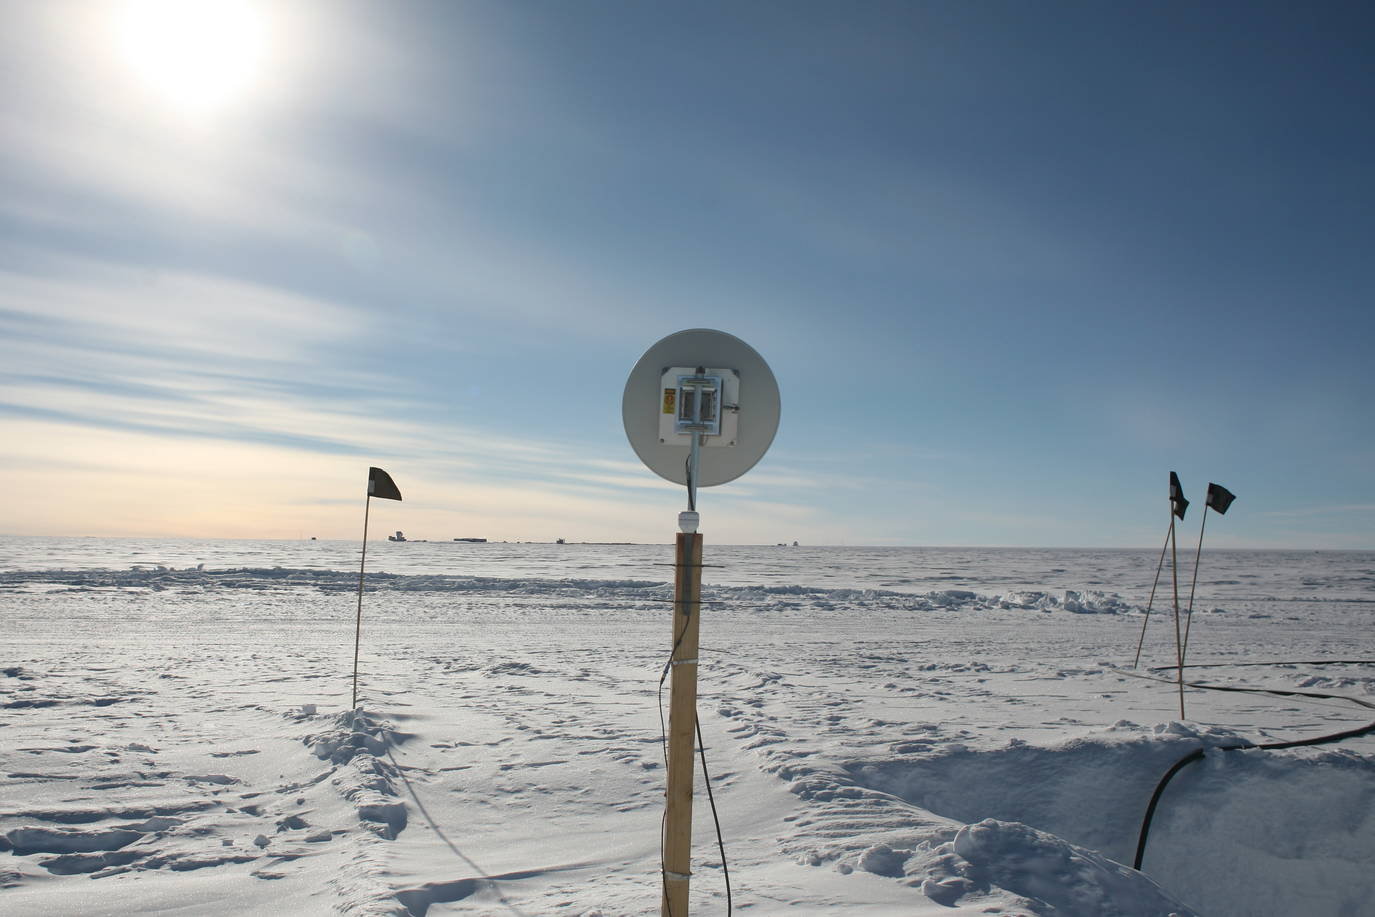 The antenna provides network connections with the station. At the horizon you can see, very small, the South Pole Telescope and the station.